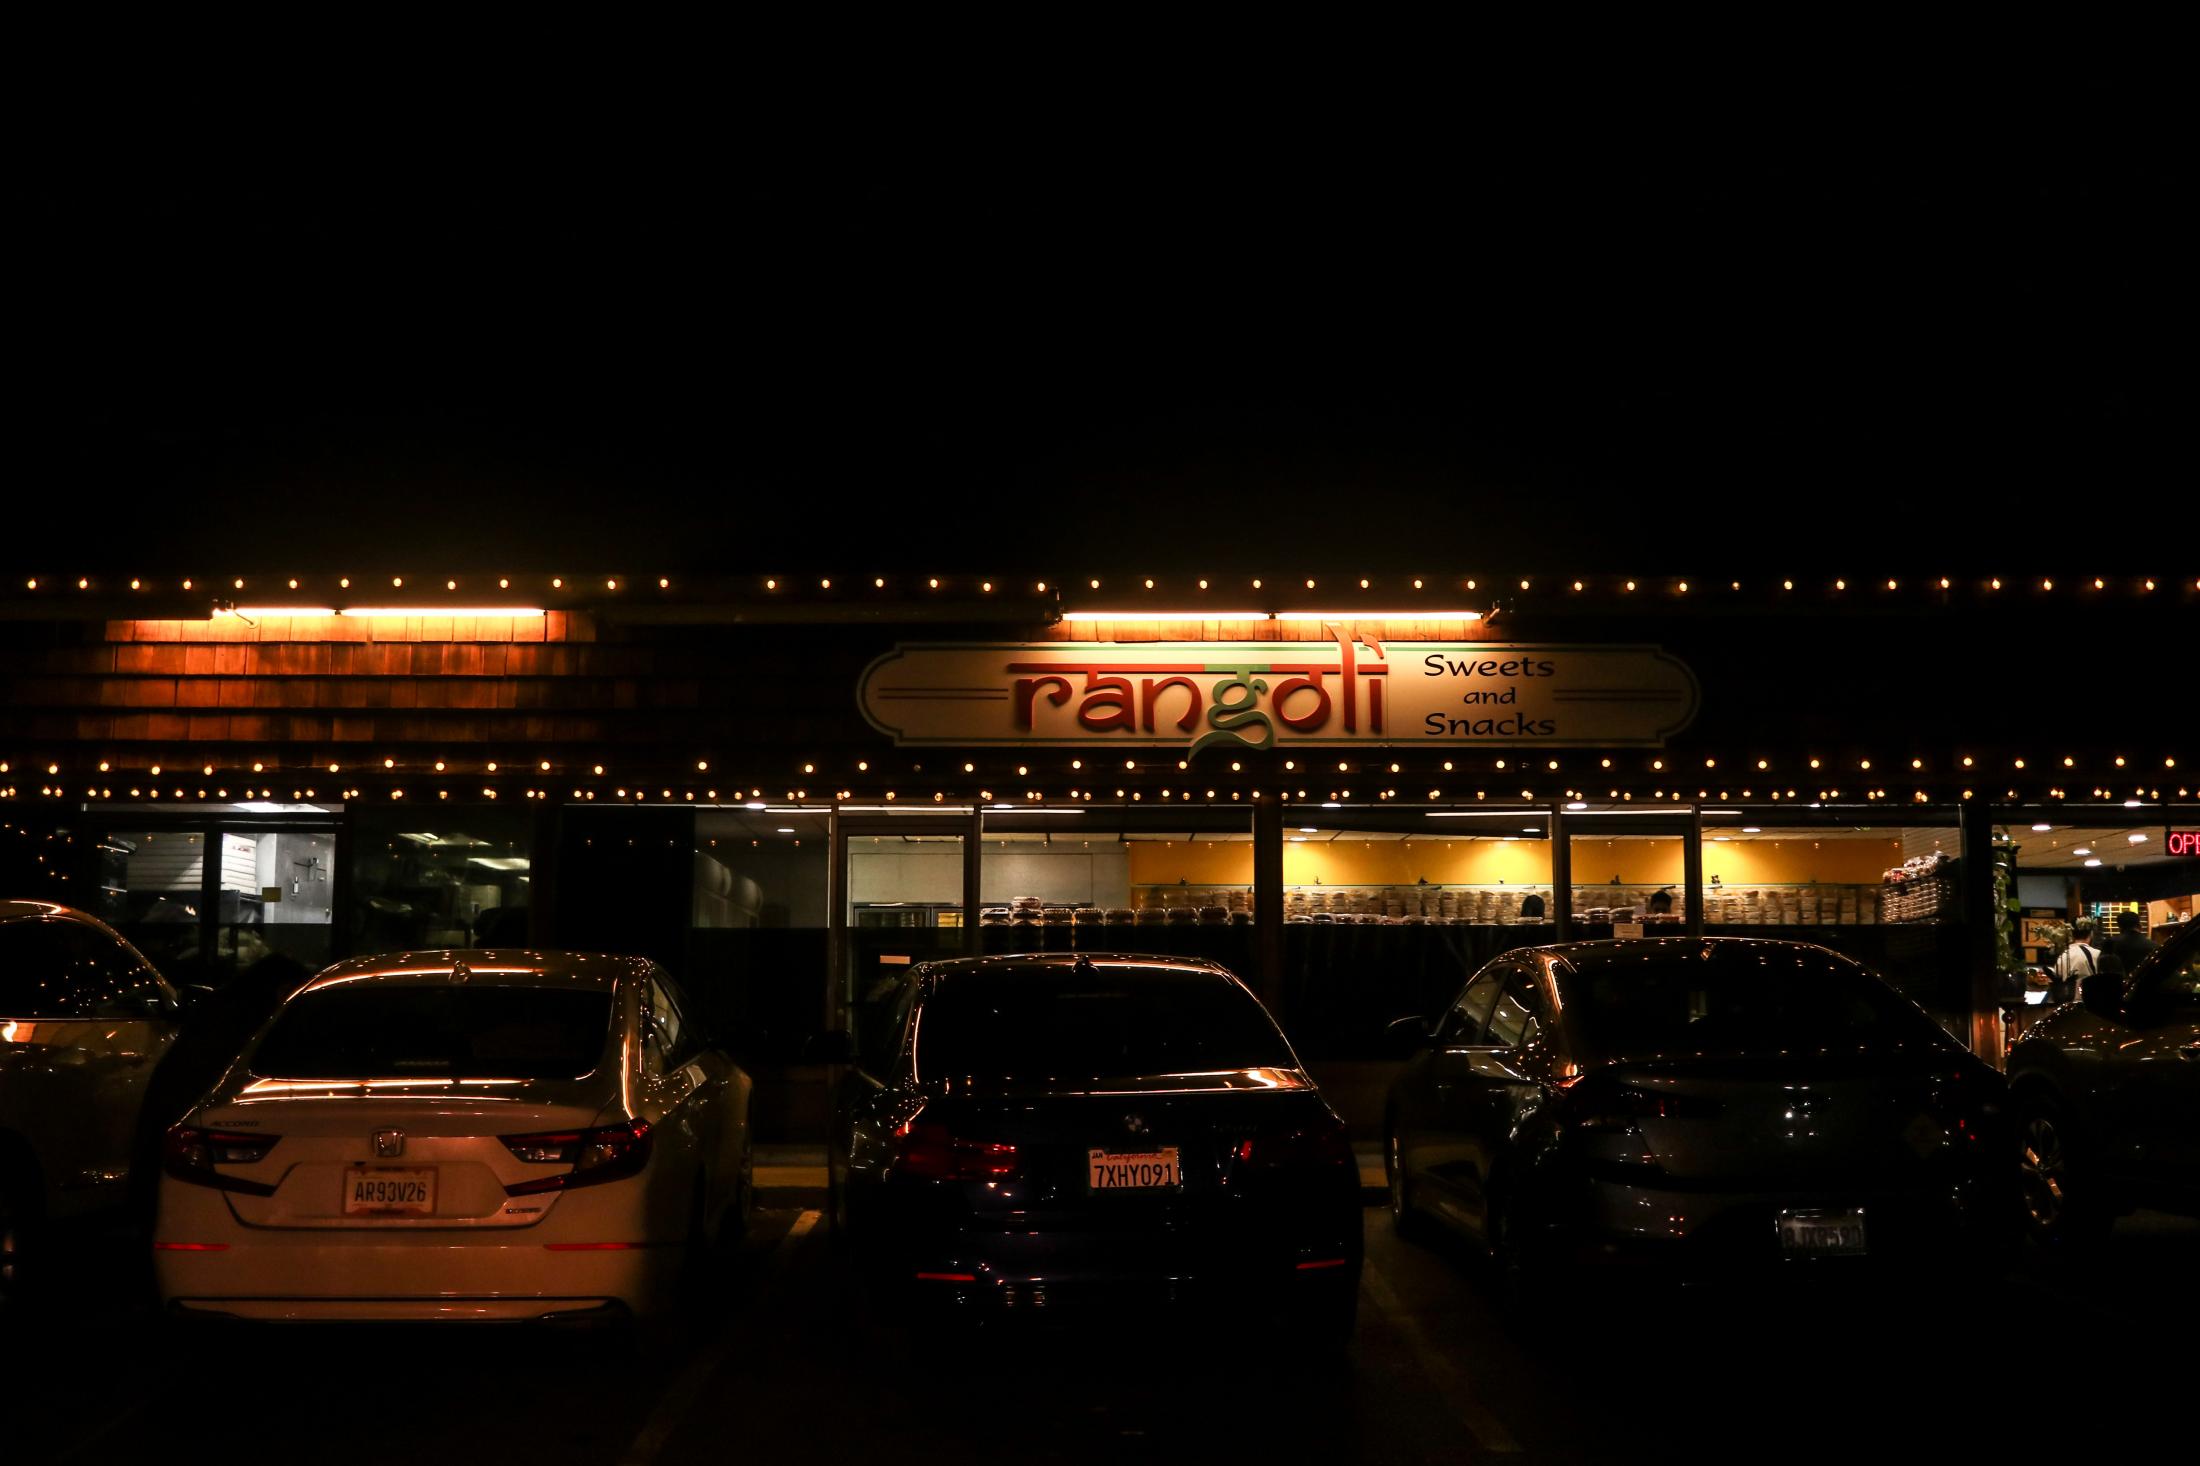 Exterior of Rangoli, an Indian sweets store, in Sunnyvale, Calif., on Saturday, Dec 14, 2019.